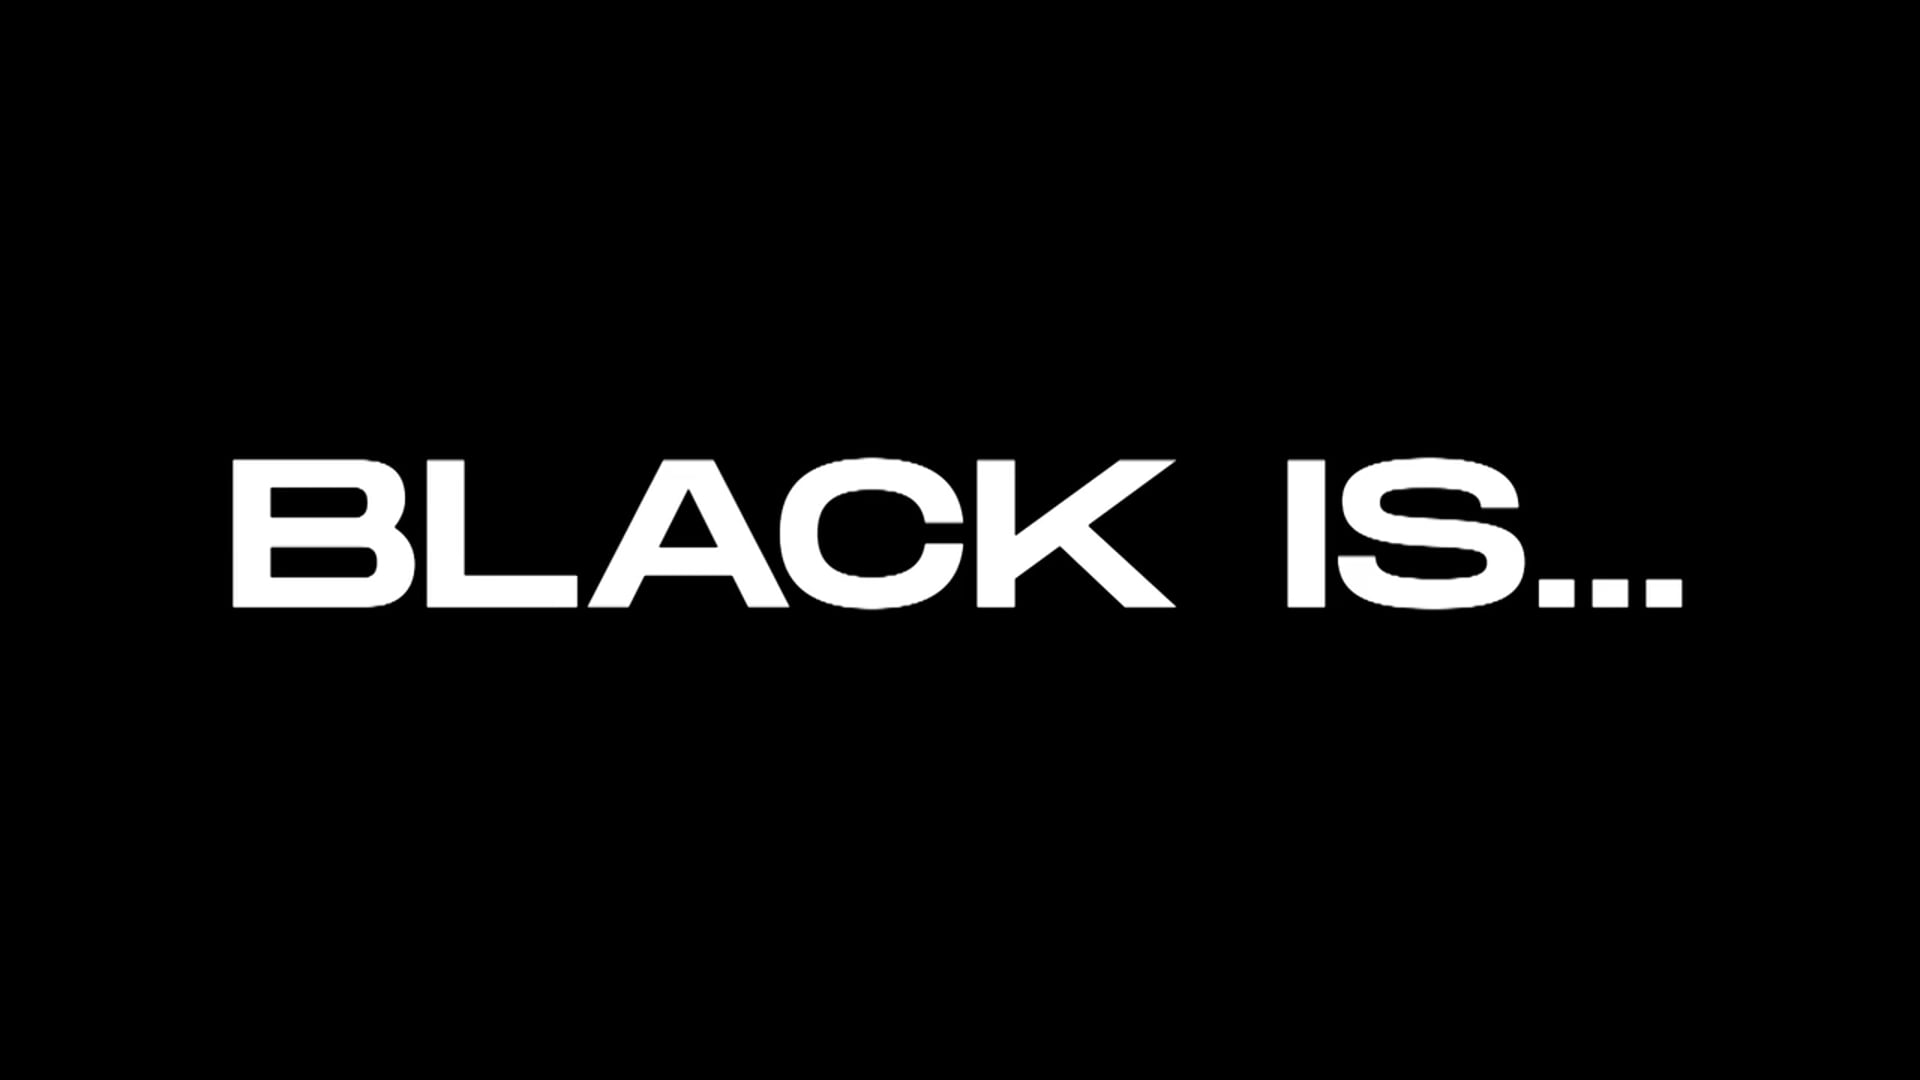 "Black is..." Brand Experimental Concept